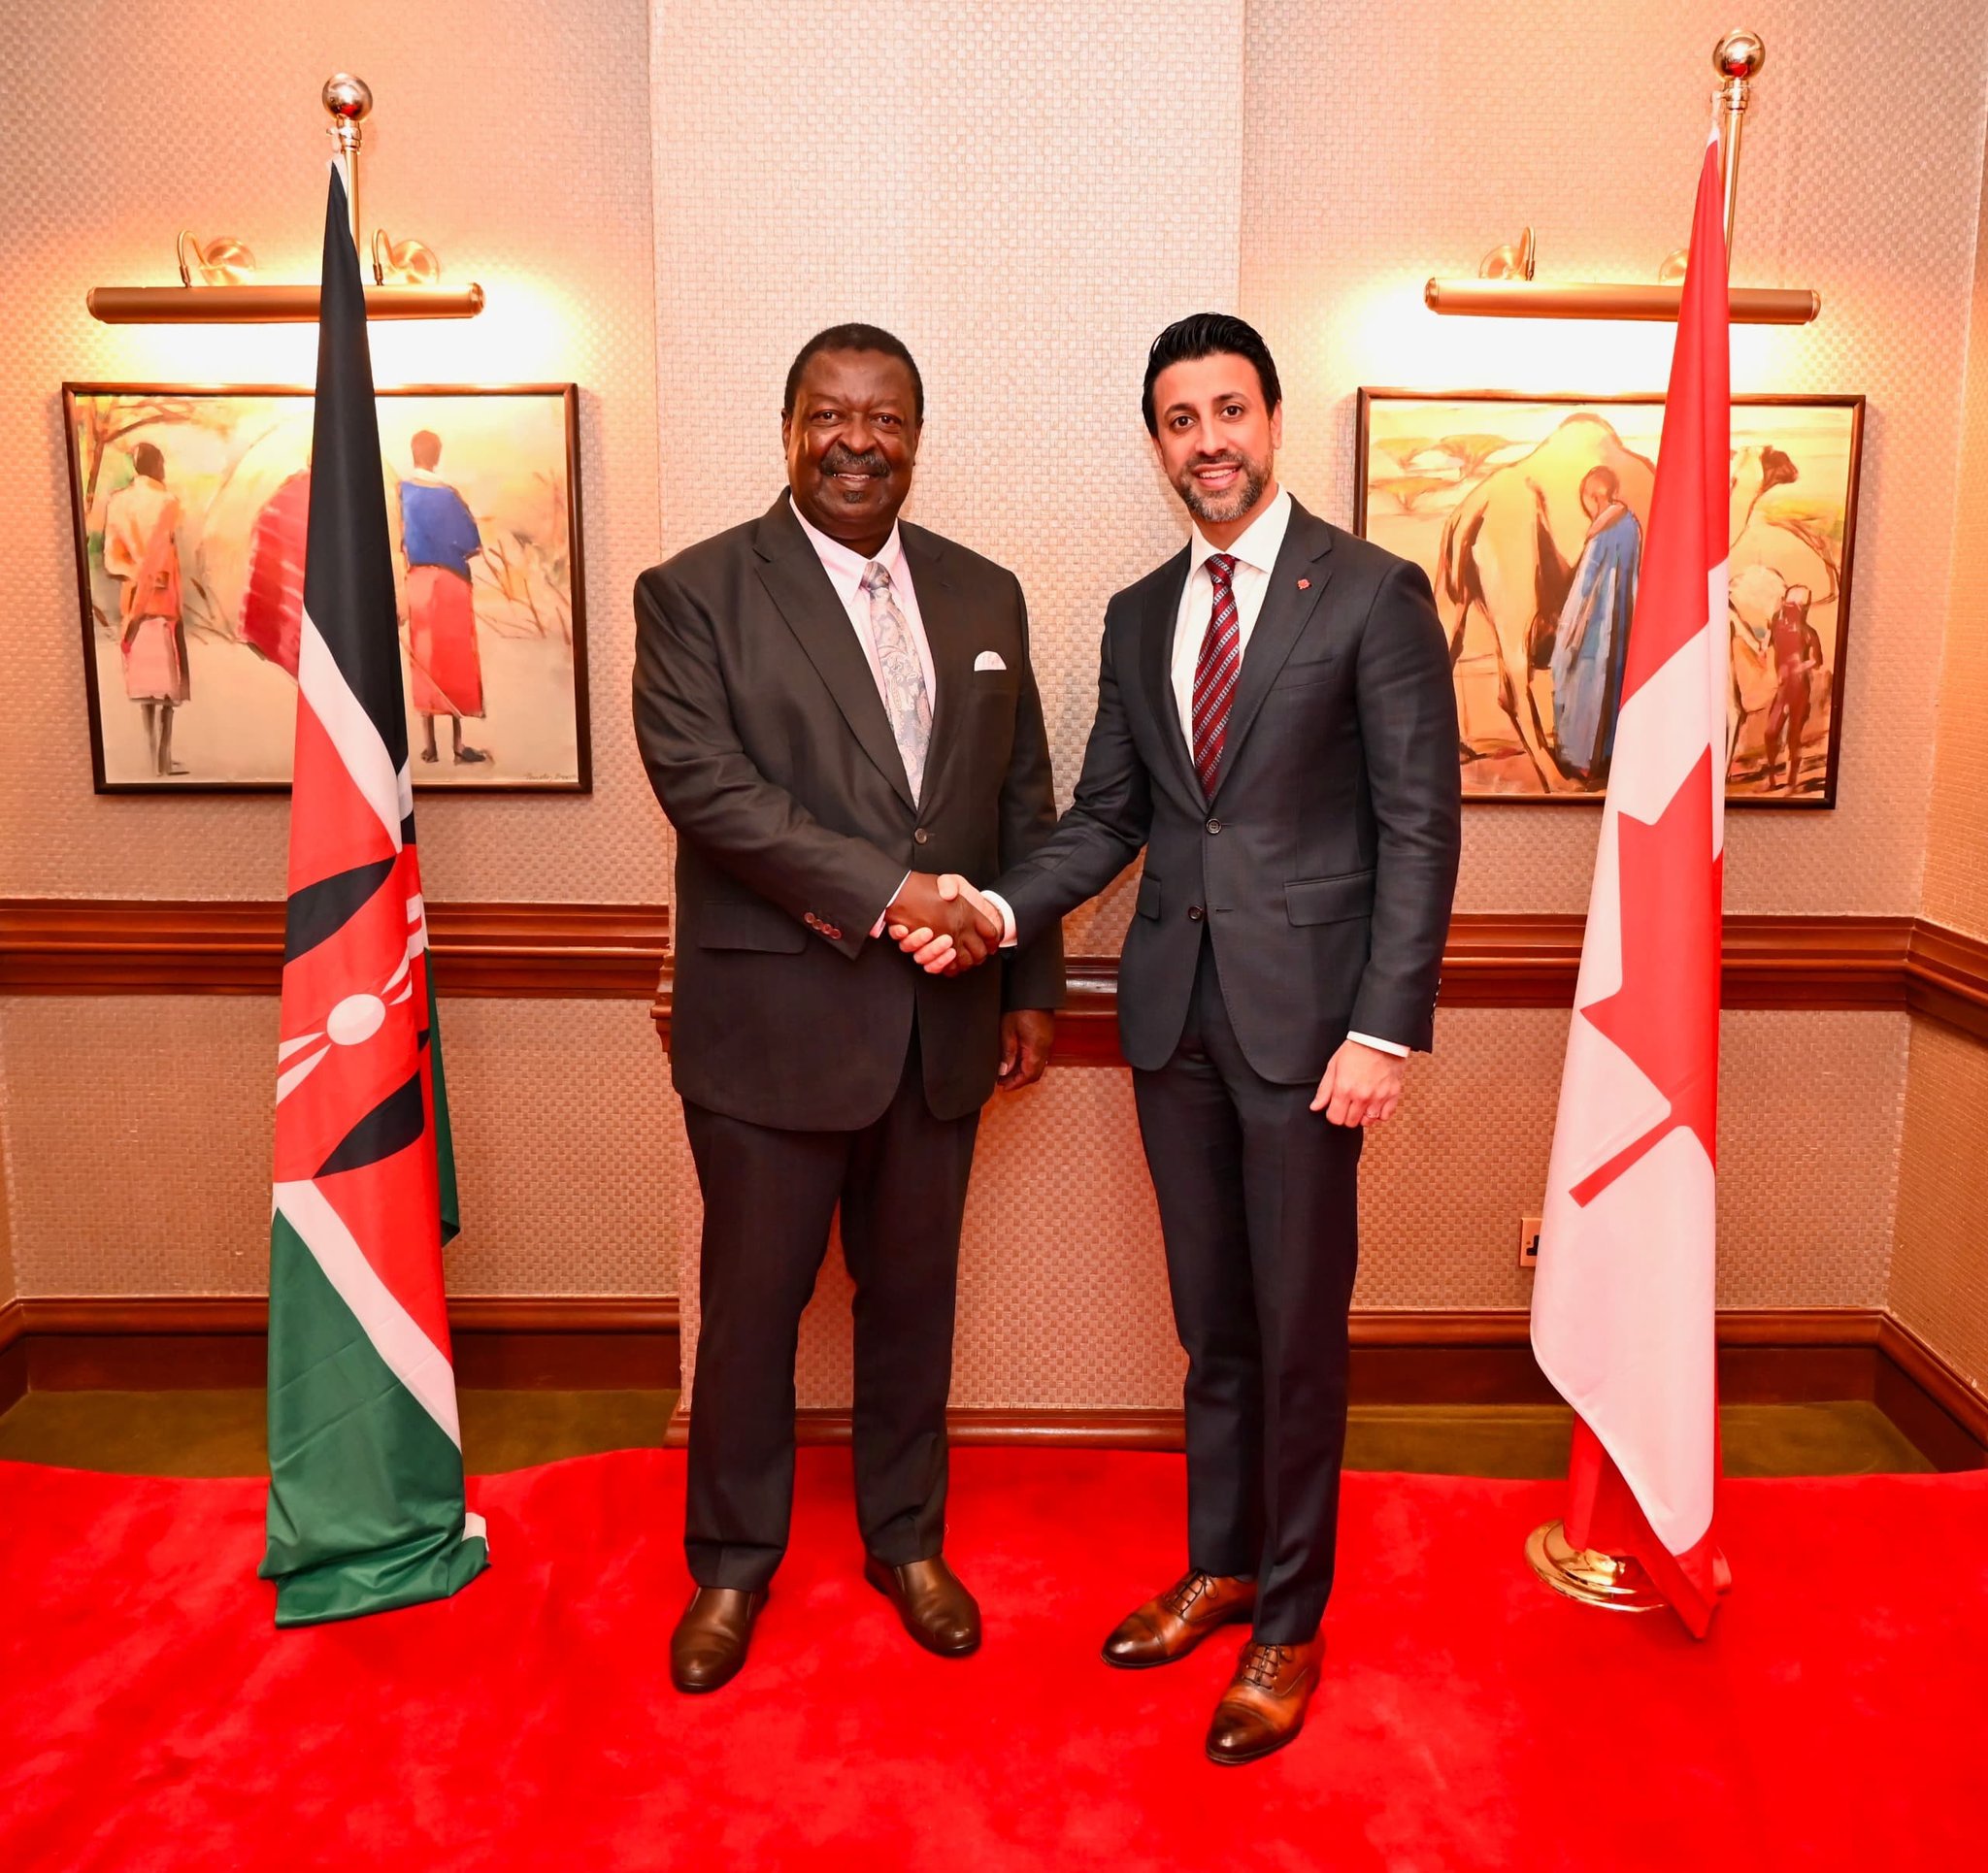 Kenya keen on enhancing trade, investment ties with Canada